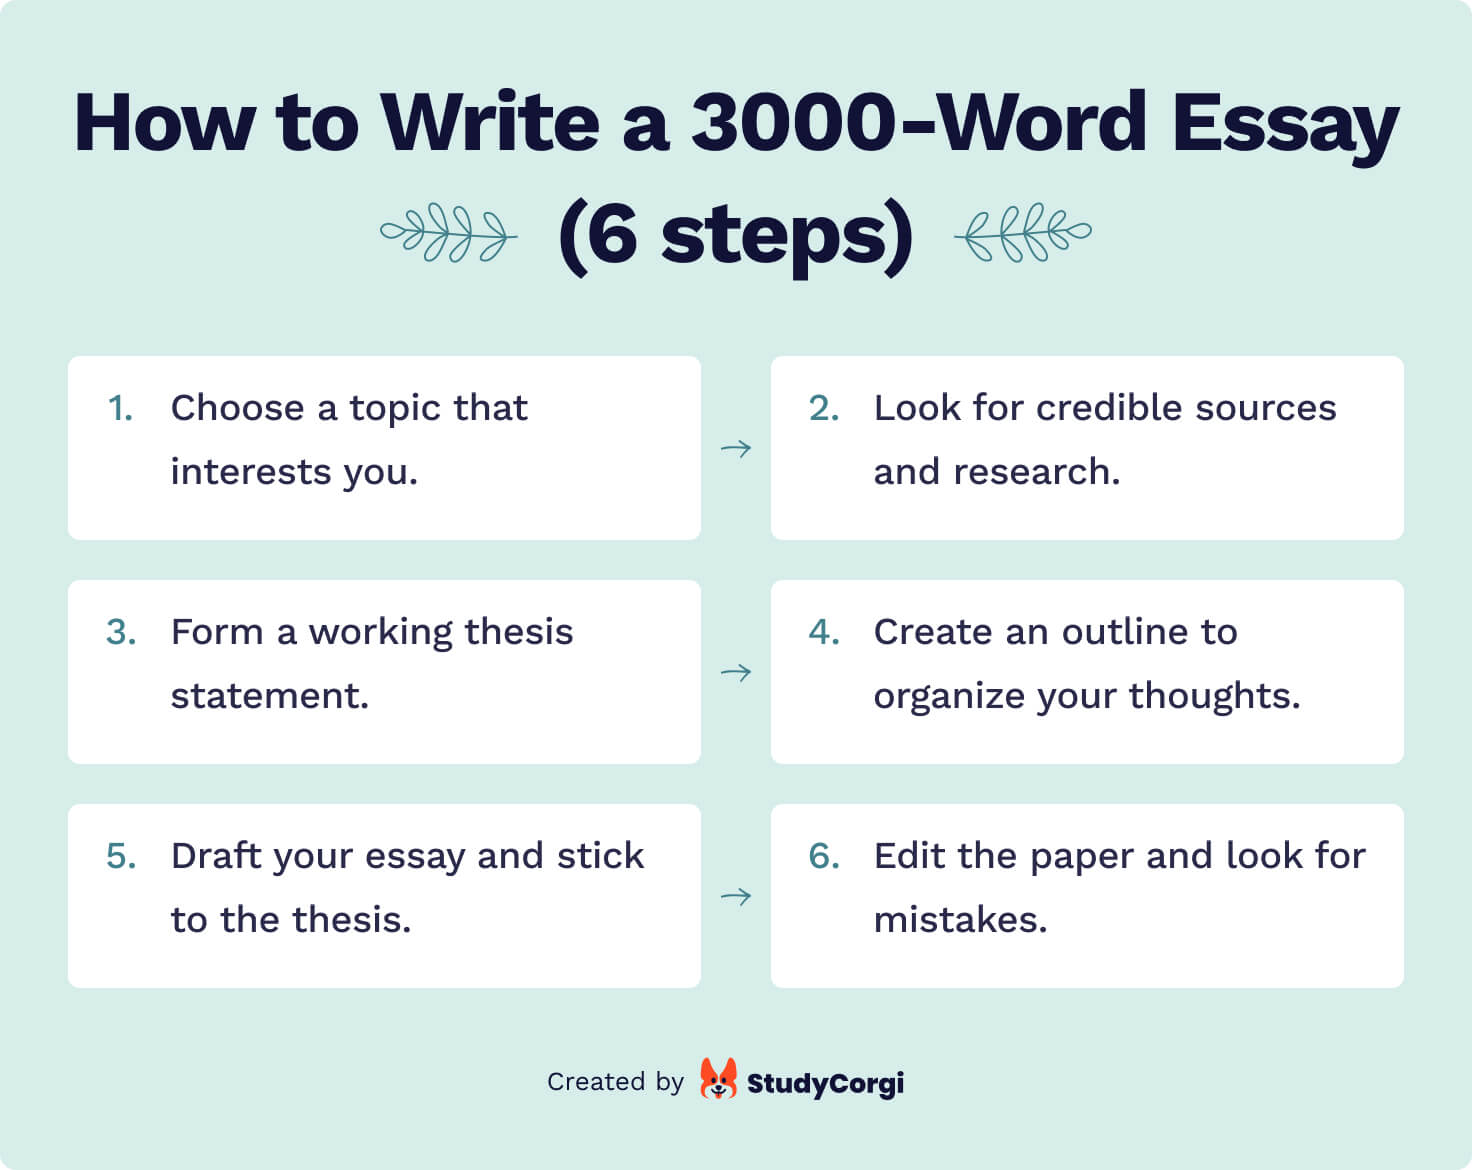 how long should an introduction be for 3000 word essay